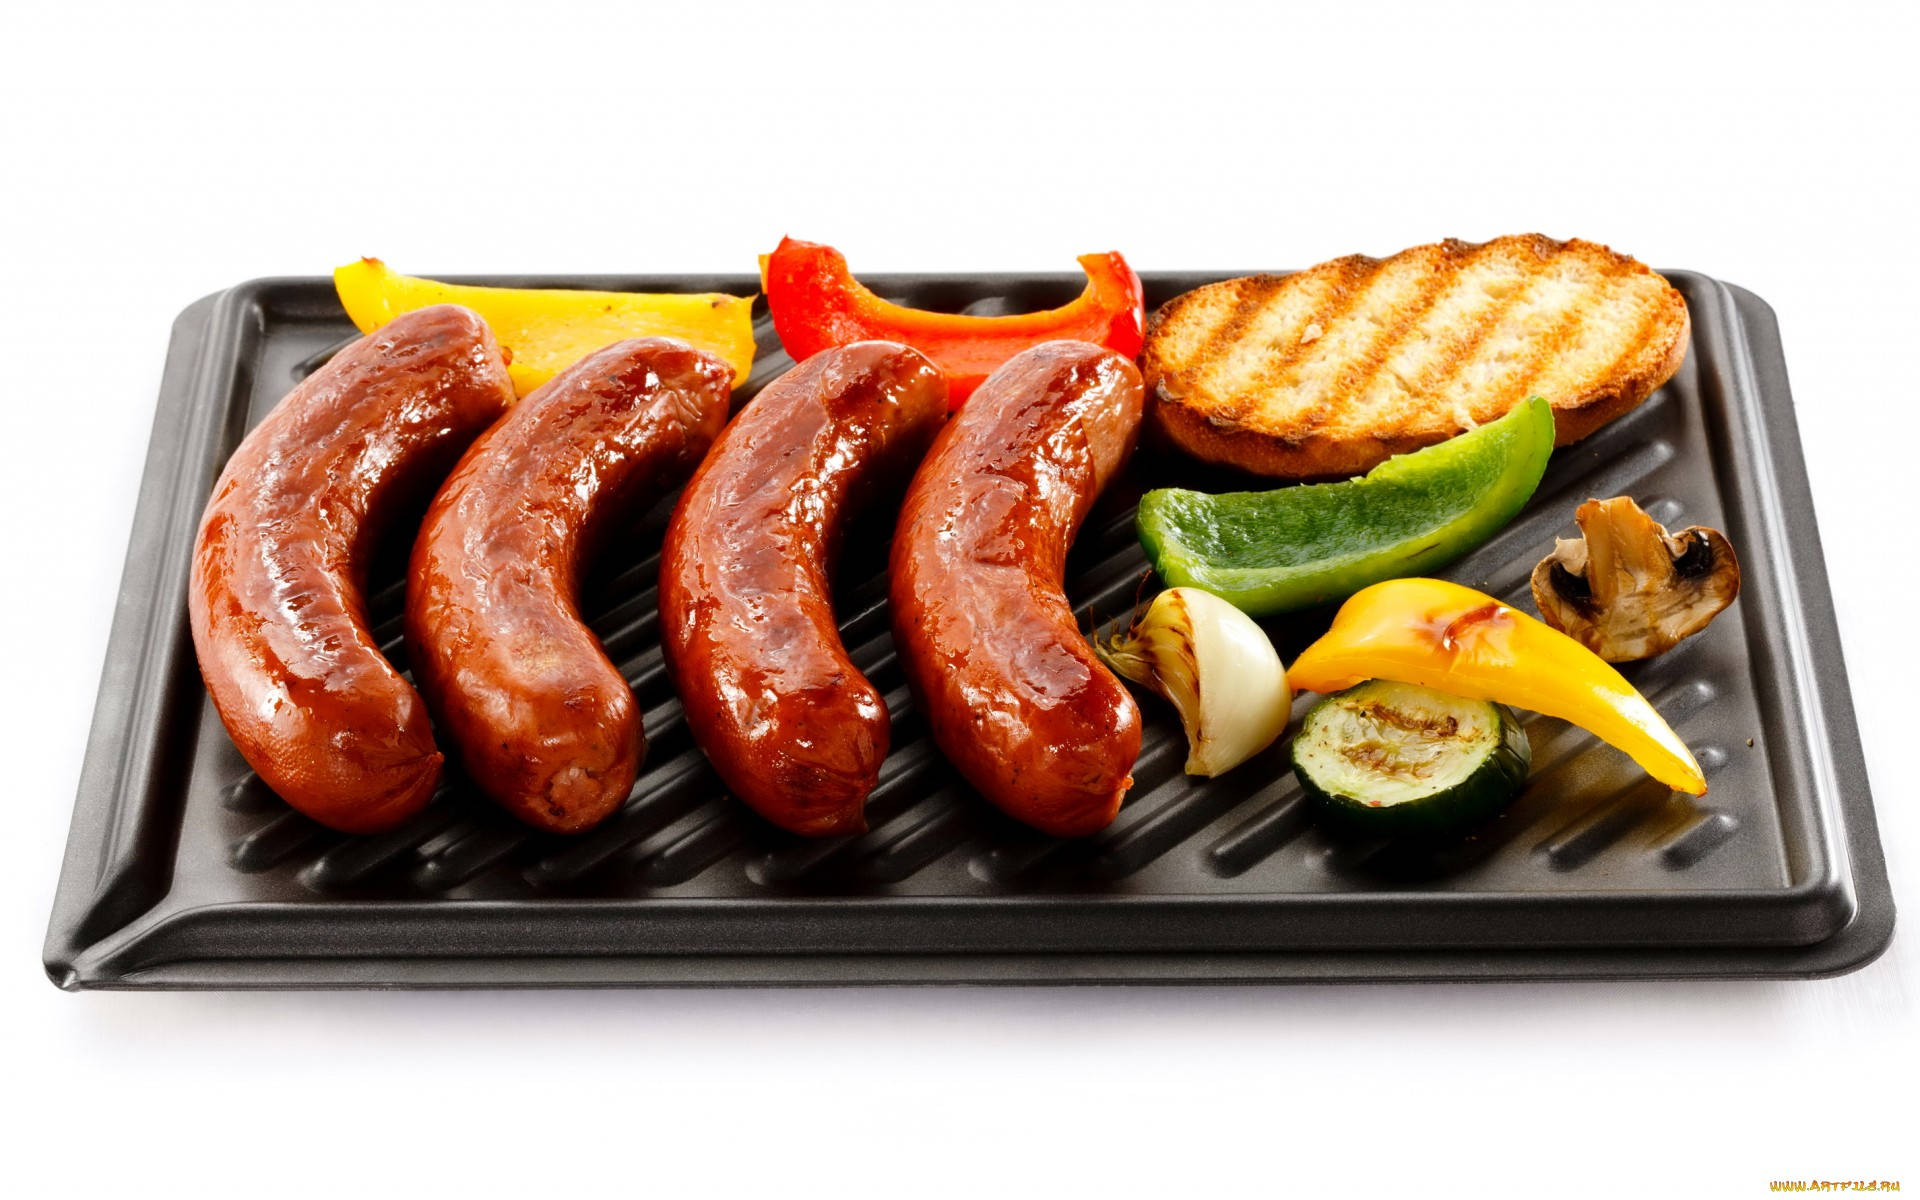 Four Sausage Meat On Griller Background